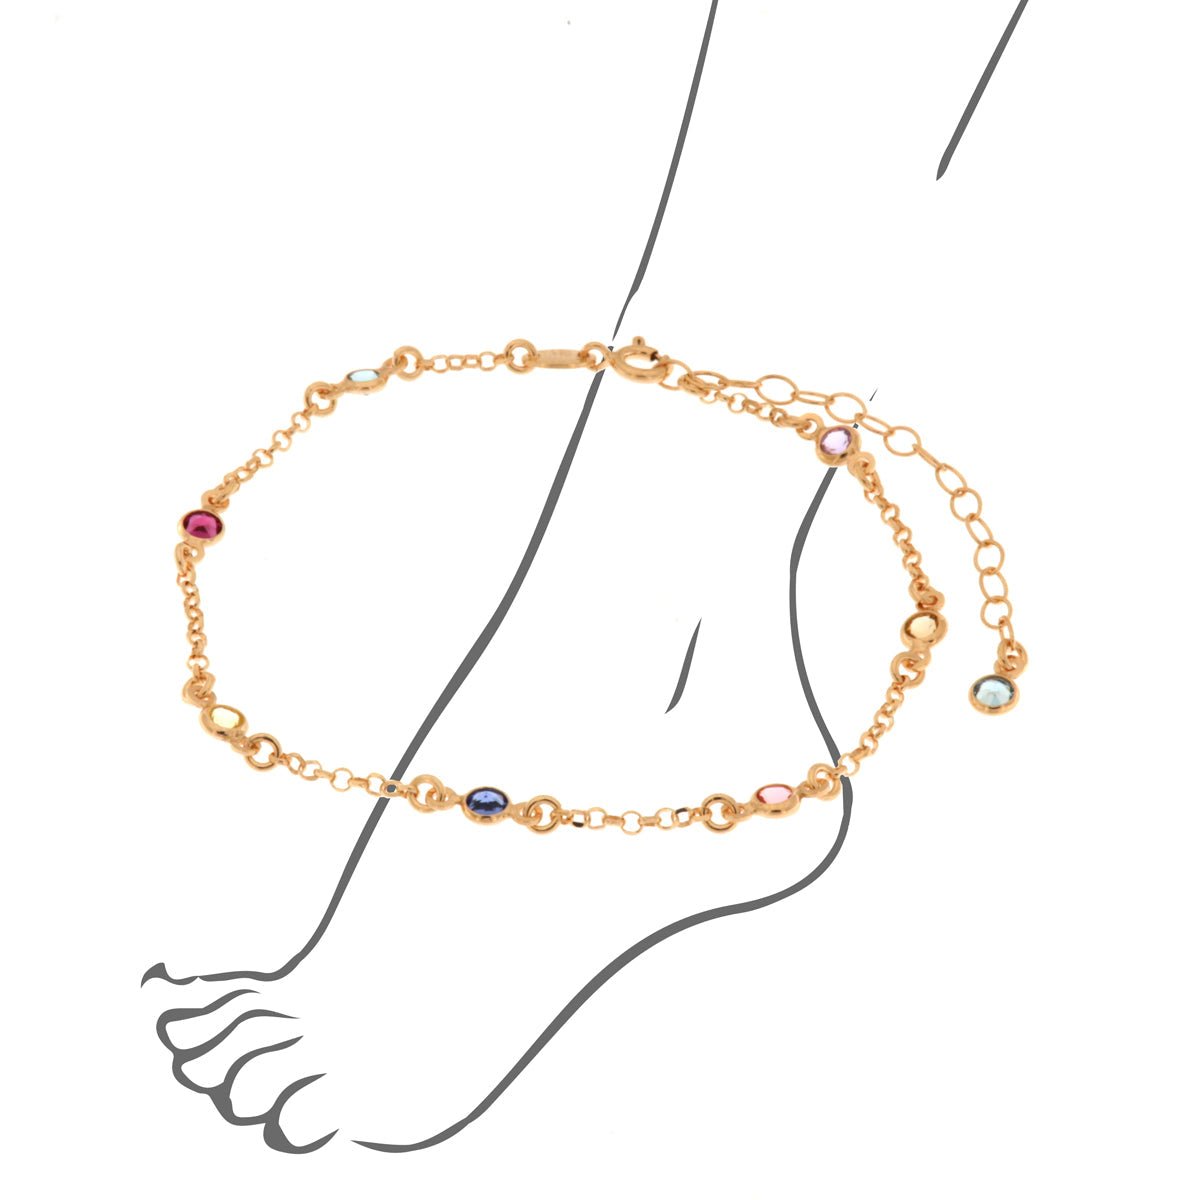 Anklet in arg 925 with white and multicolored crystals